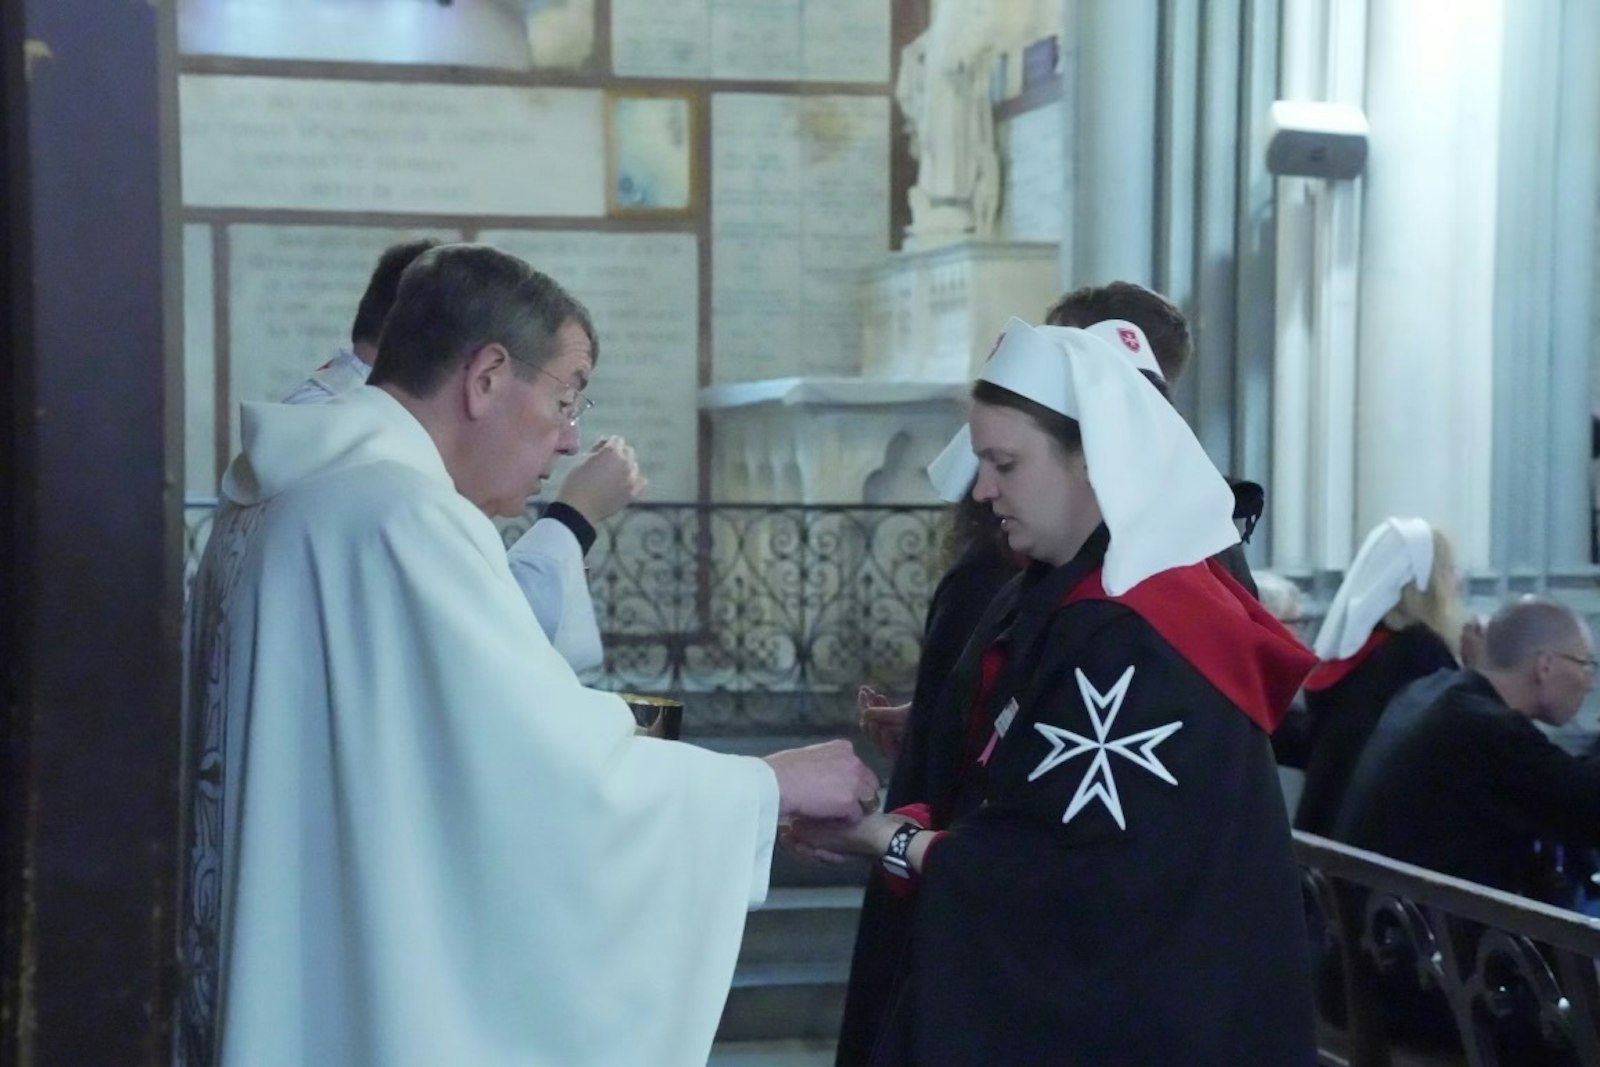 Molly Modes receives Communion from Detroit Archbishop Allen H. Vigneron during a pilgrimage this spring to Lourdes, France. Archbishop Vigneron, a member of the Order of Malta, is a frequent participant in the order's annual pilgrimage. This year, the archbishop was named Grand Cross Conventual Chaplain Ad Honorem of the order in honor of his service to the poor and sick.